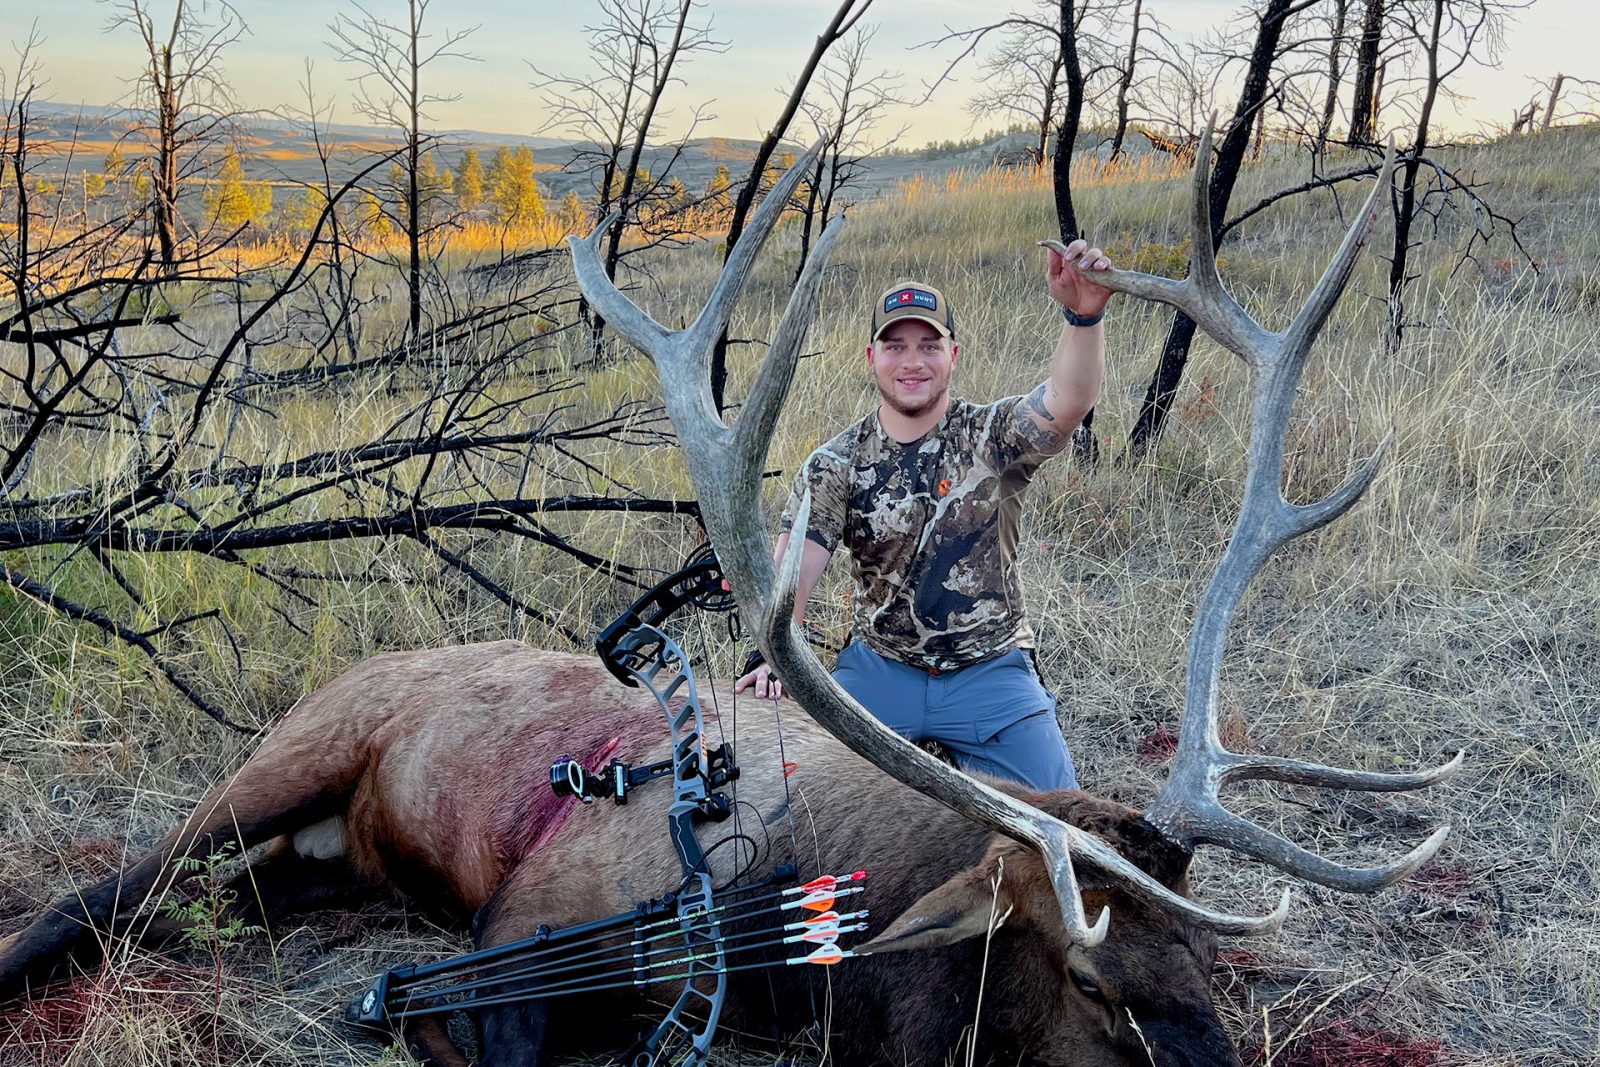 Dylan Dowson from onX Hunt with a bull elk he downed on an archery elk hunt